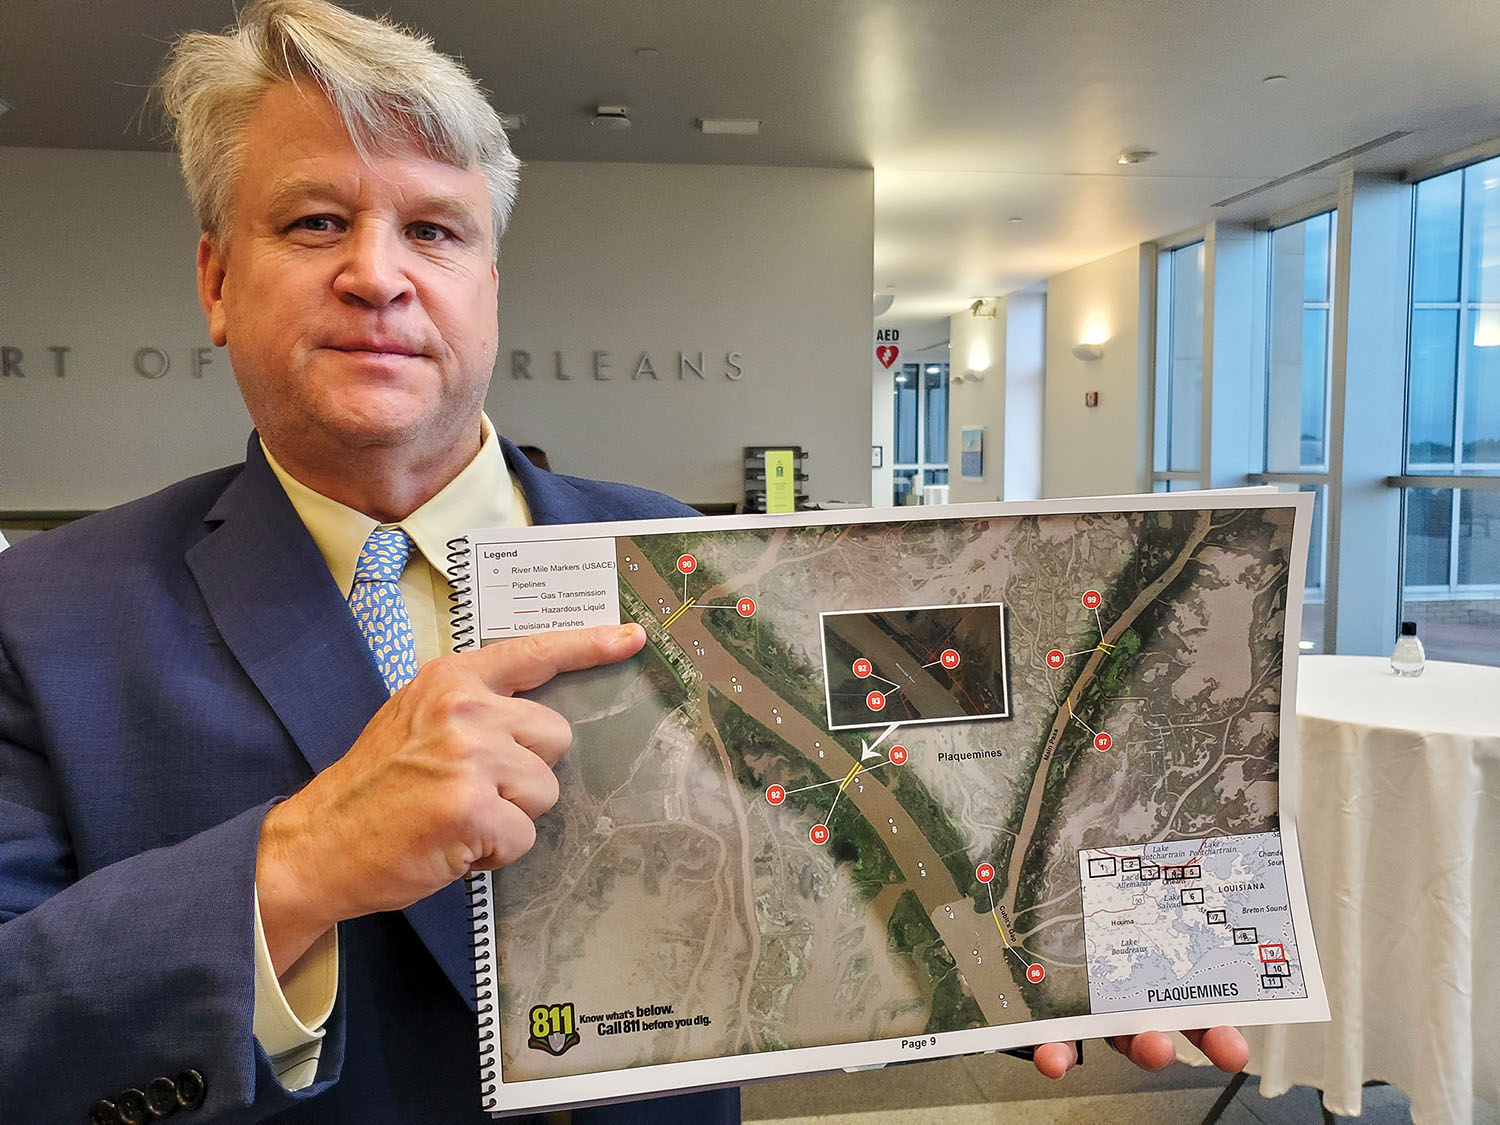 Sean Duffy with the Lower Mississippi River Pipeline Identification Guide. (Photo by Richard Eberhardt)